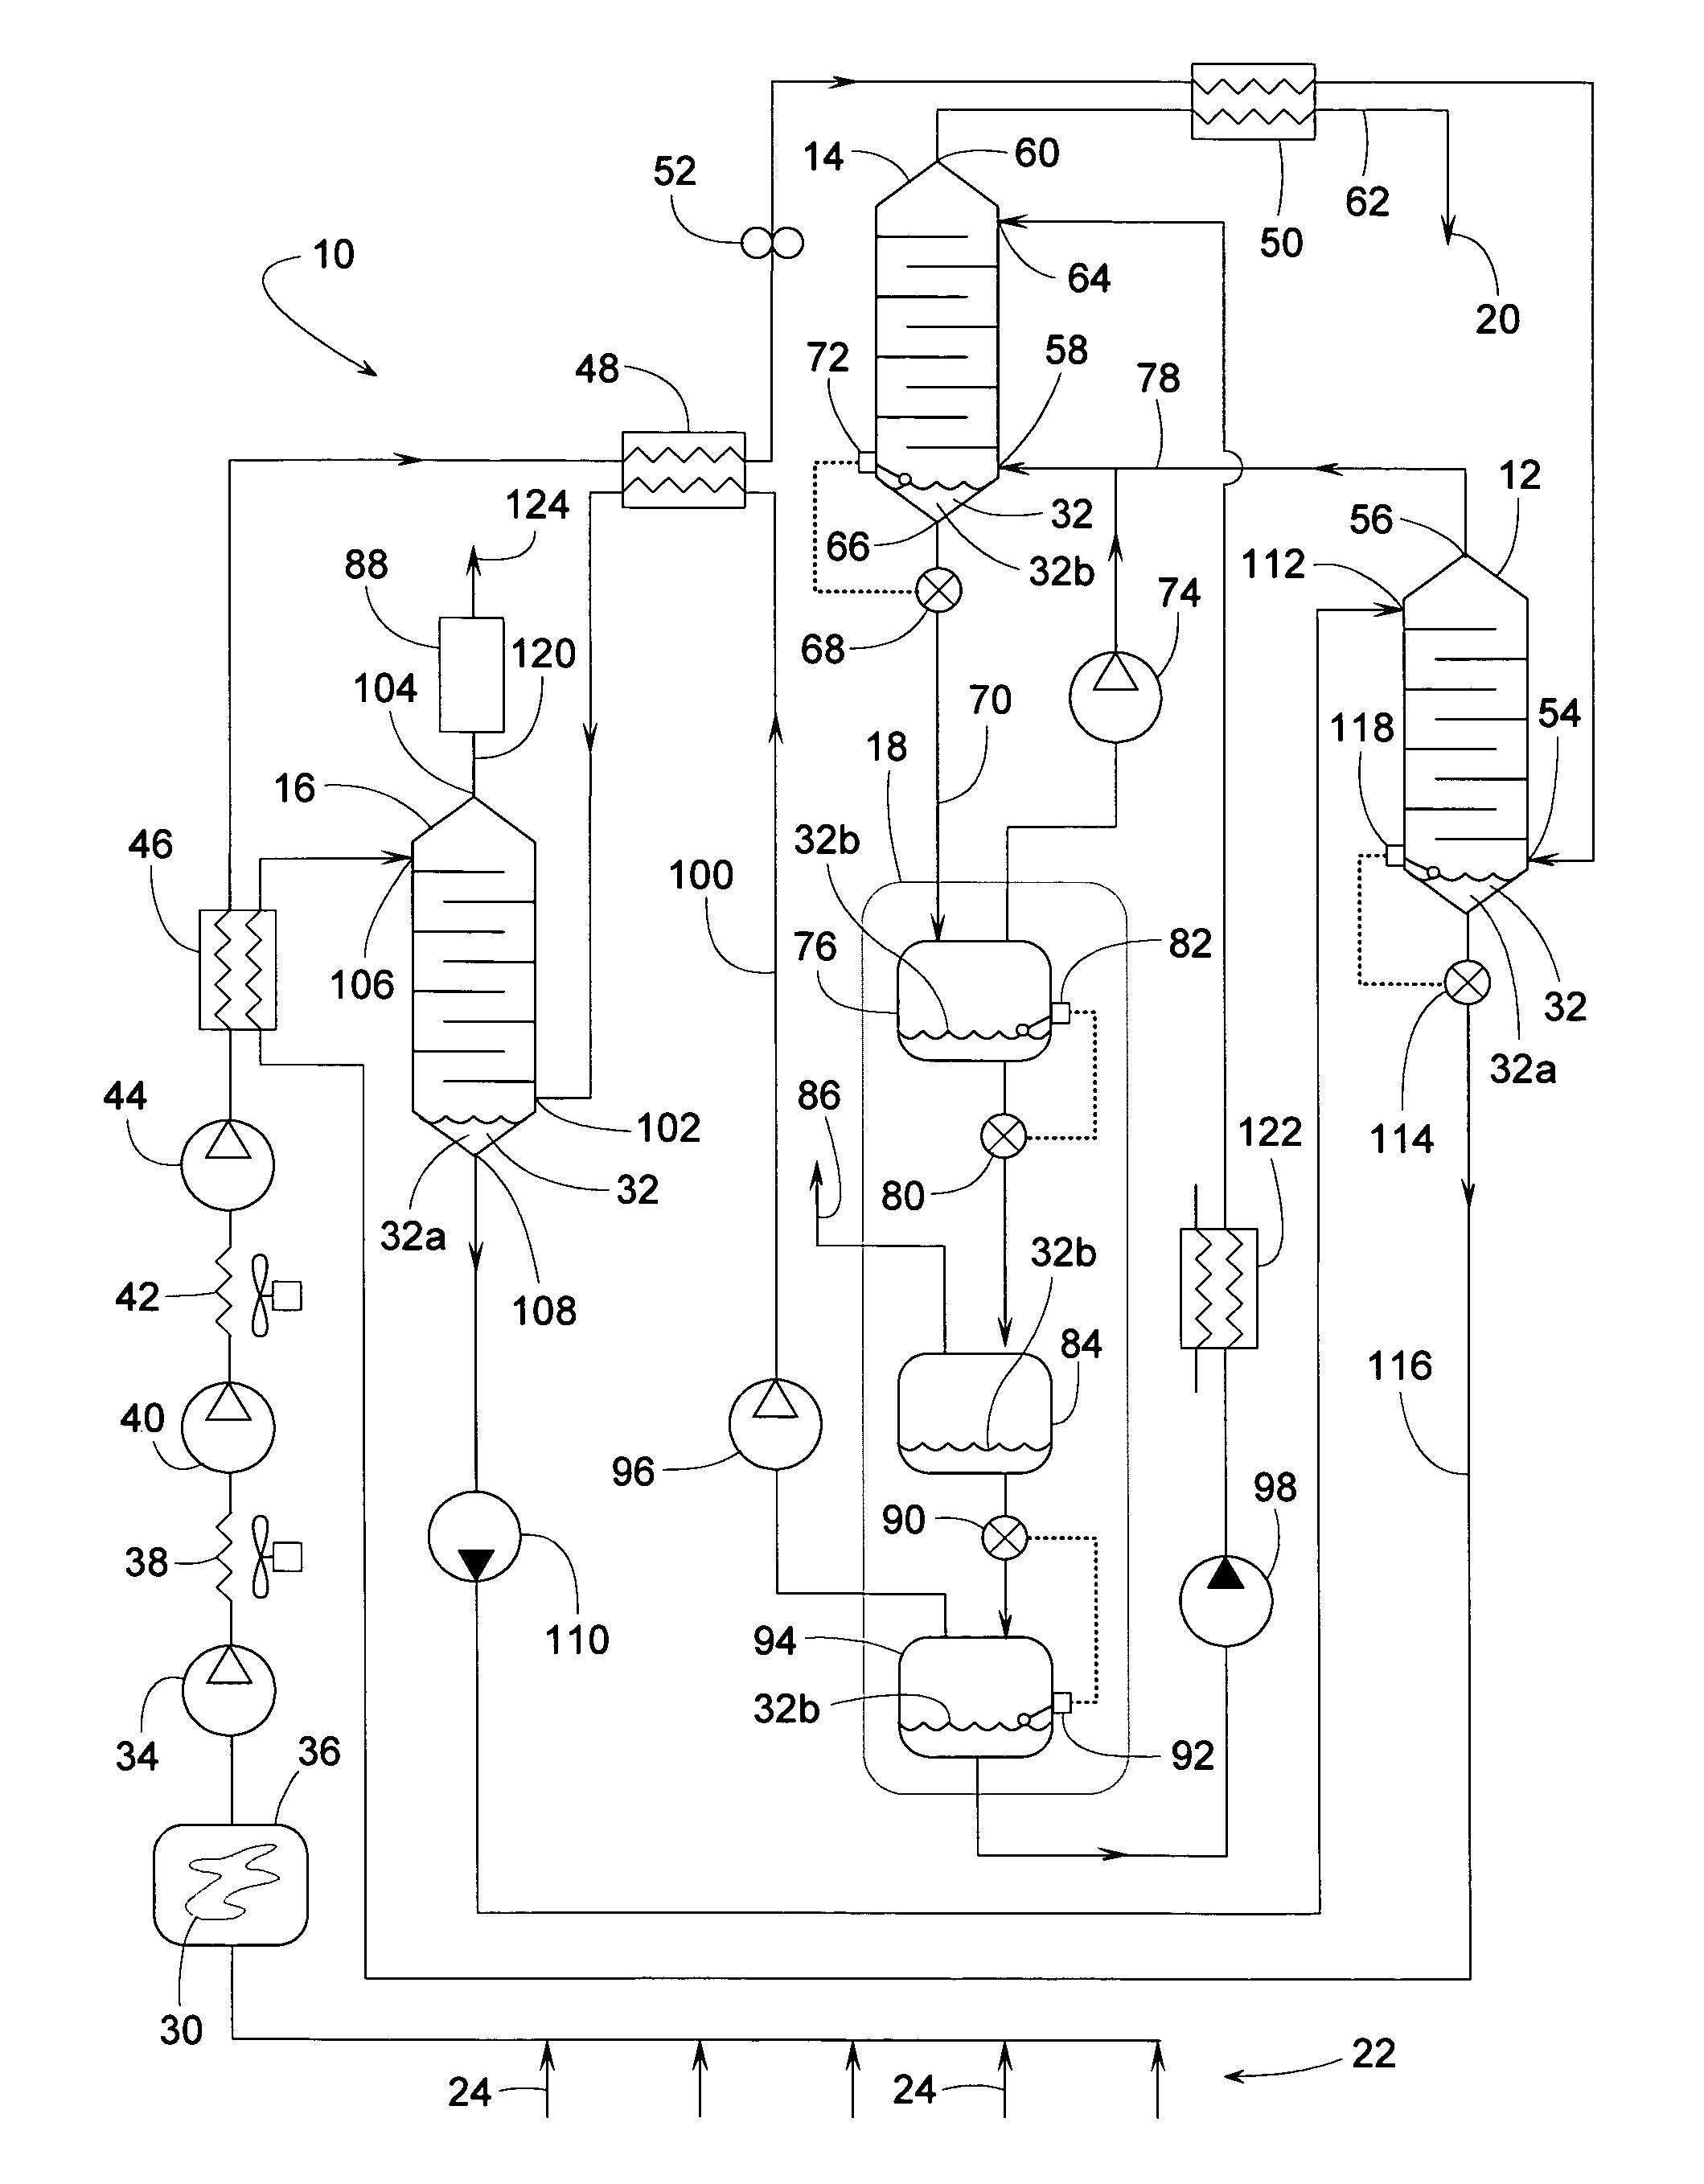 Triple-effect absorption system for recovering methane gas